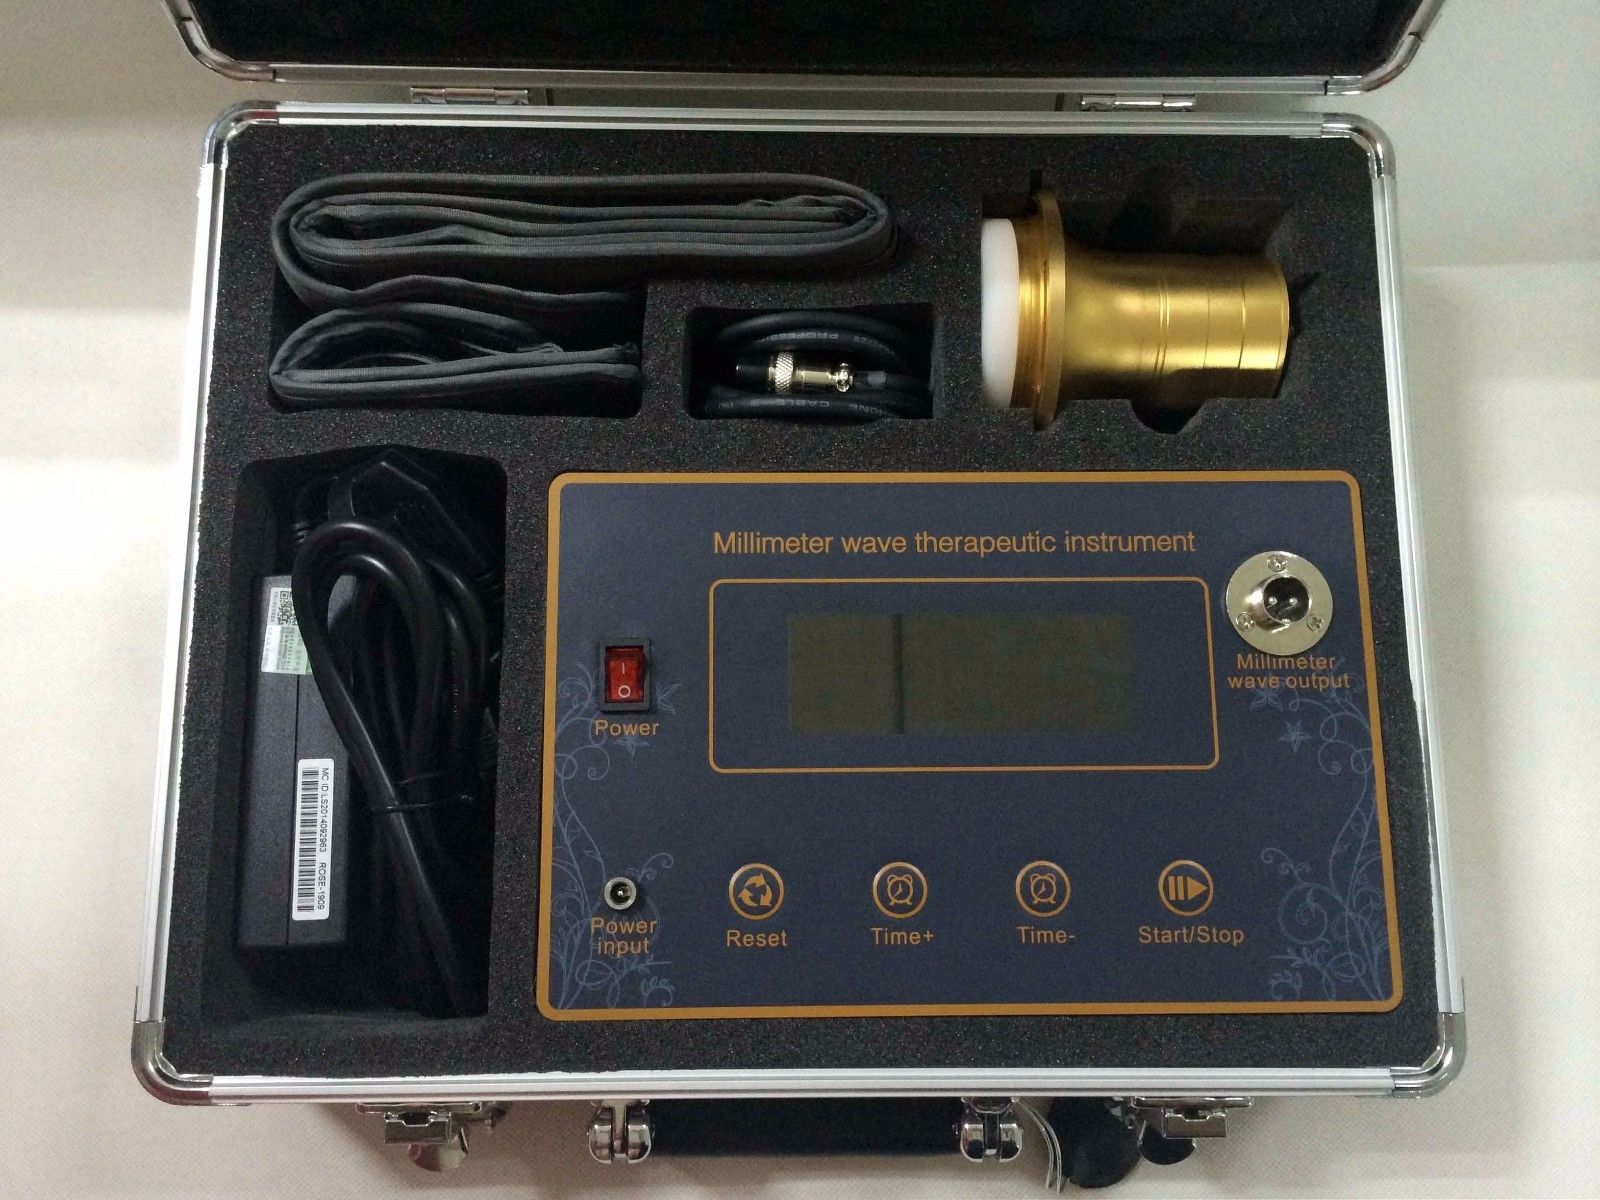 Cancer & Diabetes Treatment Minimeter Wave Therapy Device